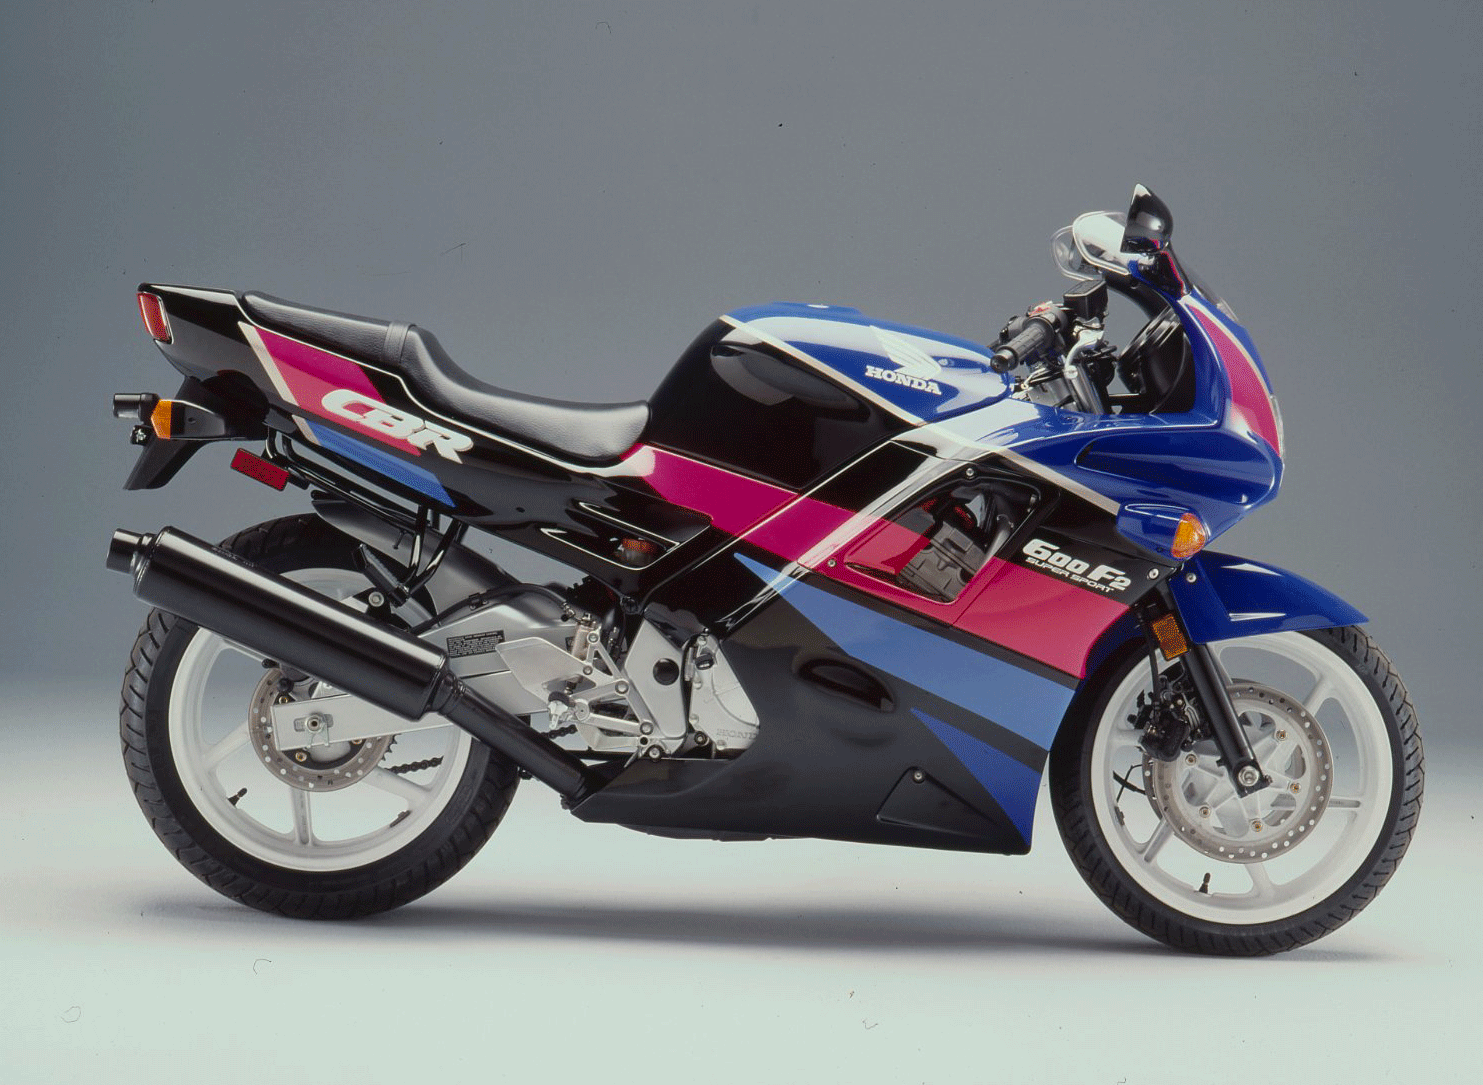 Even with stock paint, the 1991 Honda CBR600F2 is bold both track- and paint-wise.